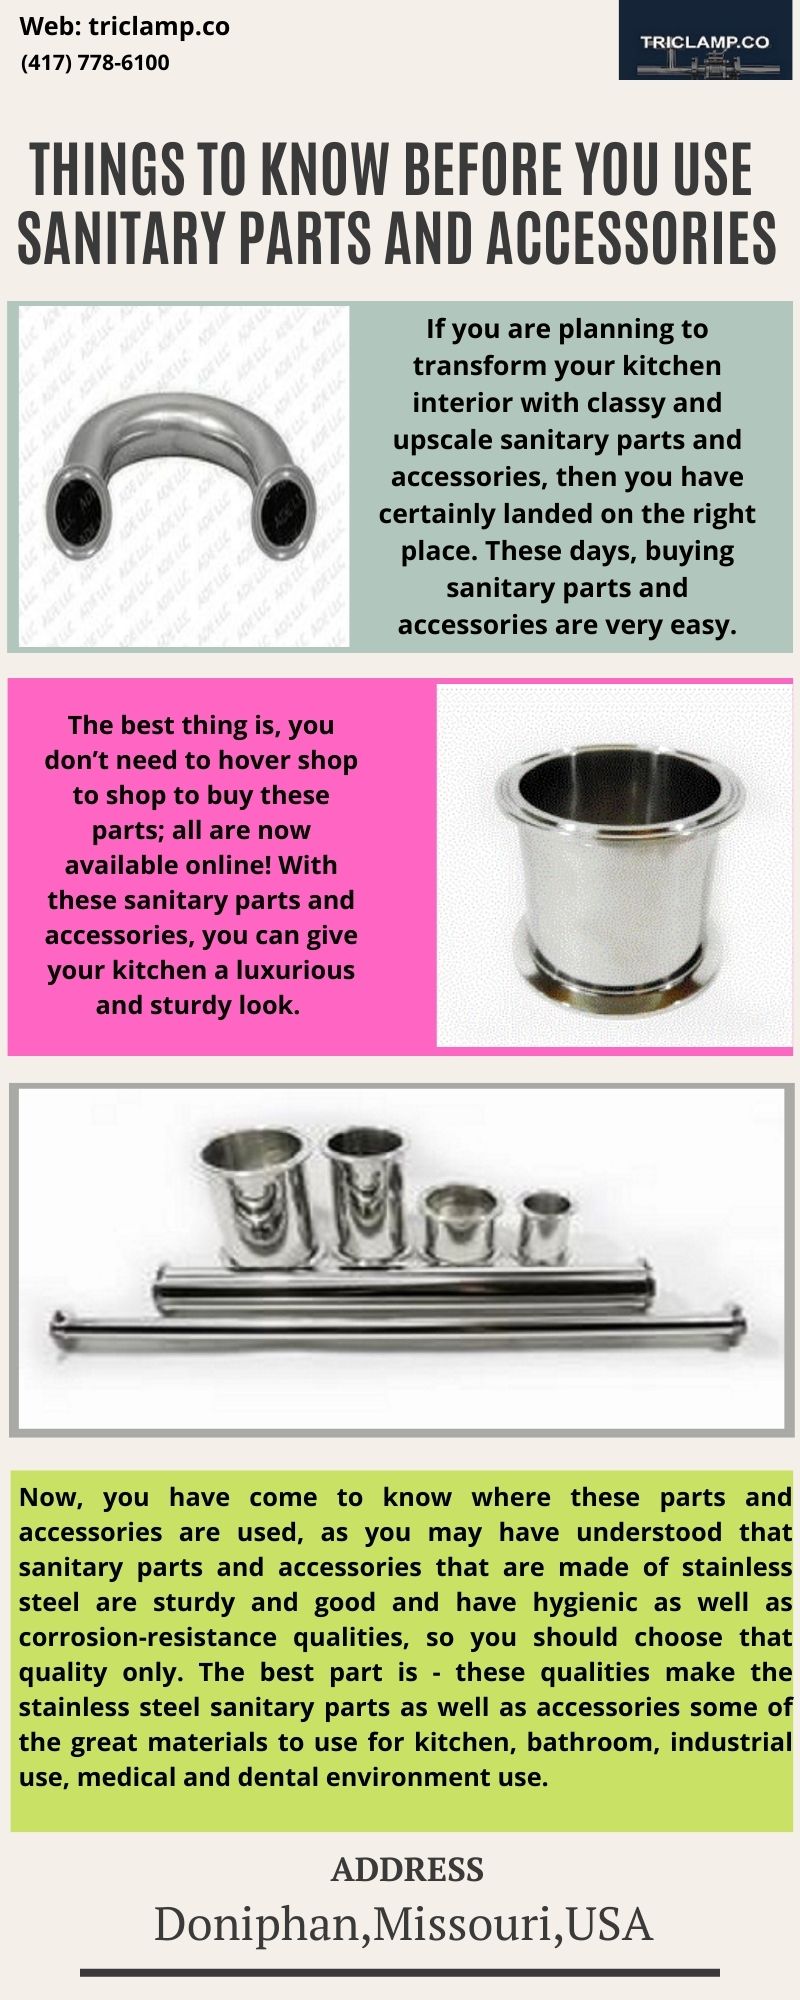 Things to Know Before You Use Sanitary Parts and Accessories.jpg Please visit:  https://telegra.ph/Things-to-Know-Before-You-Use-Sanitary-Parts-and-Accessories-12-07 by Triclamp